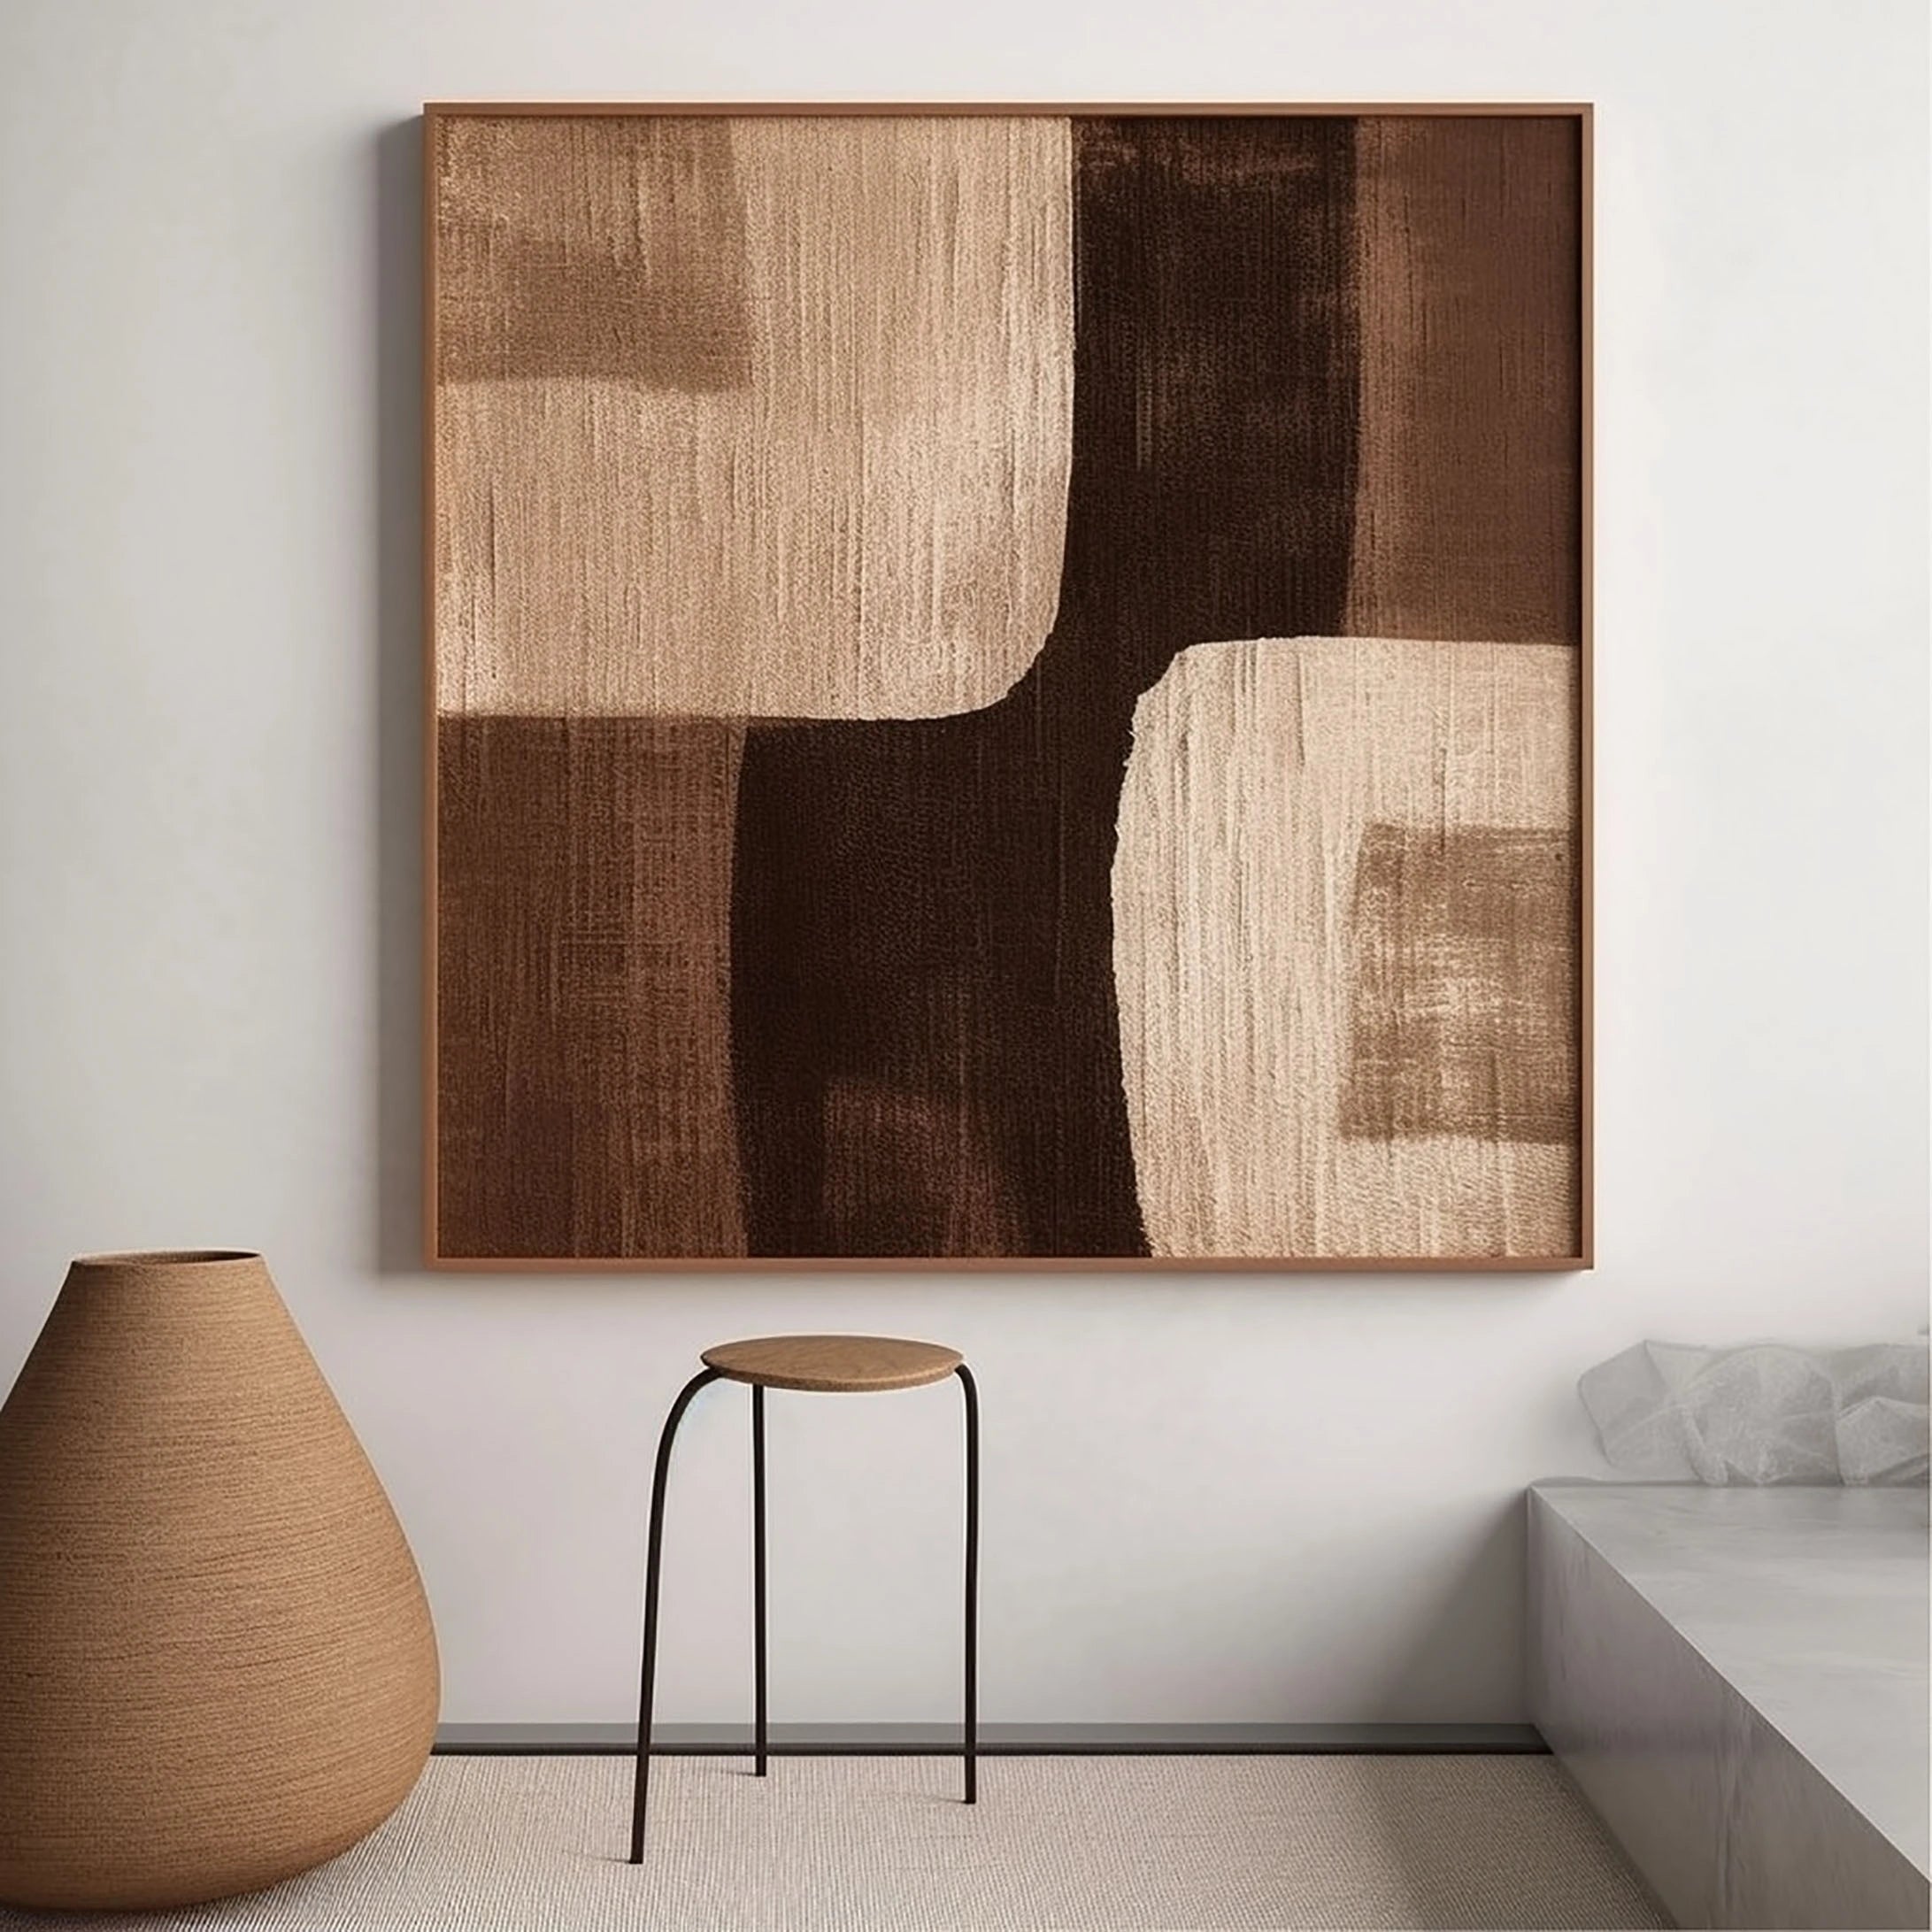 Eleanos Gallery Textured Wabi Sabi Abstract Brown Painting Wall Canvas Artwork